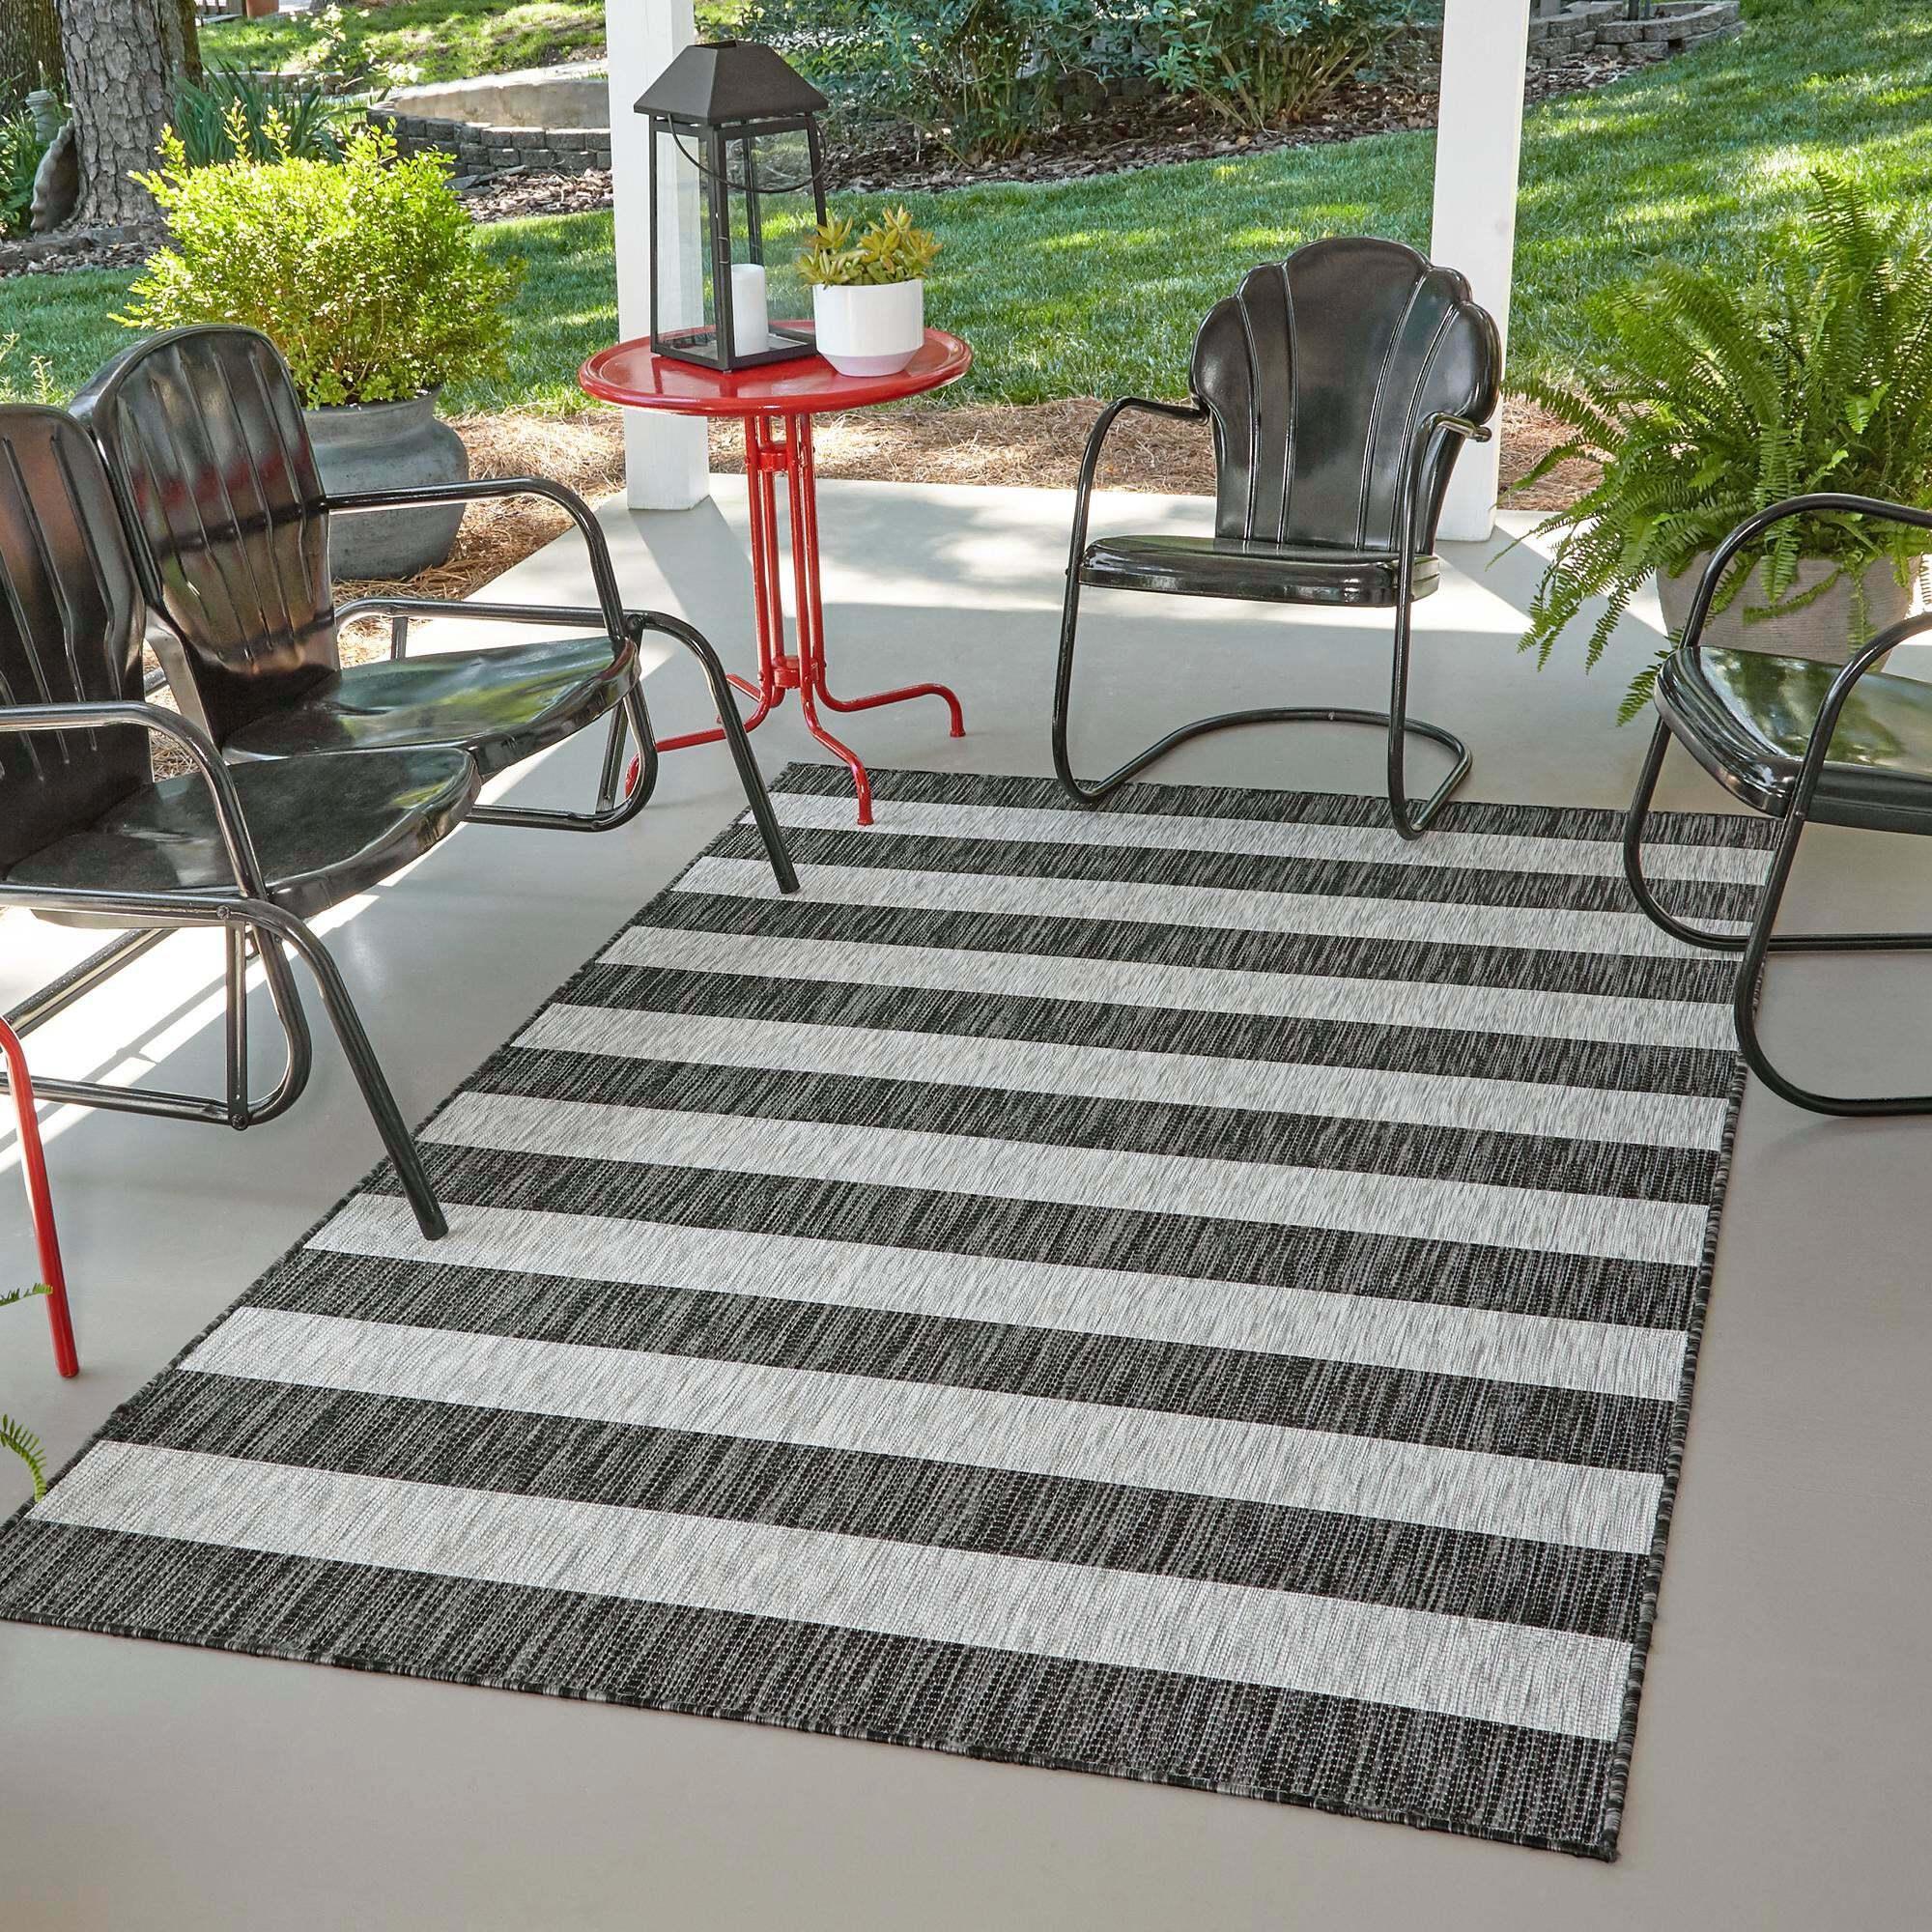 Unique Loom Outdoor Rugs - Outdoor Striped Striped Rectangular 8x11 Rug Gray & Black